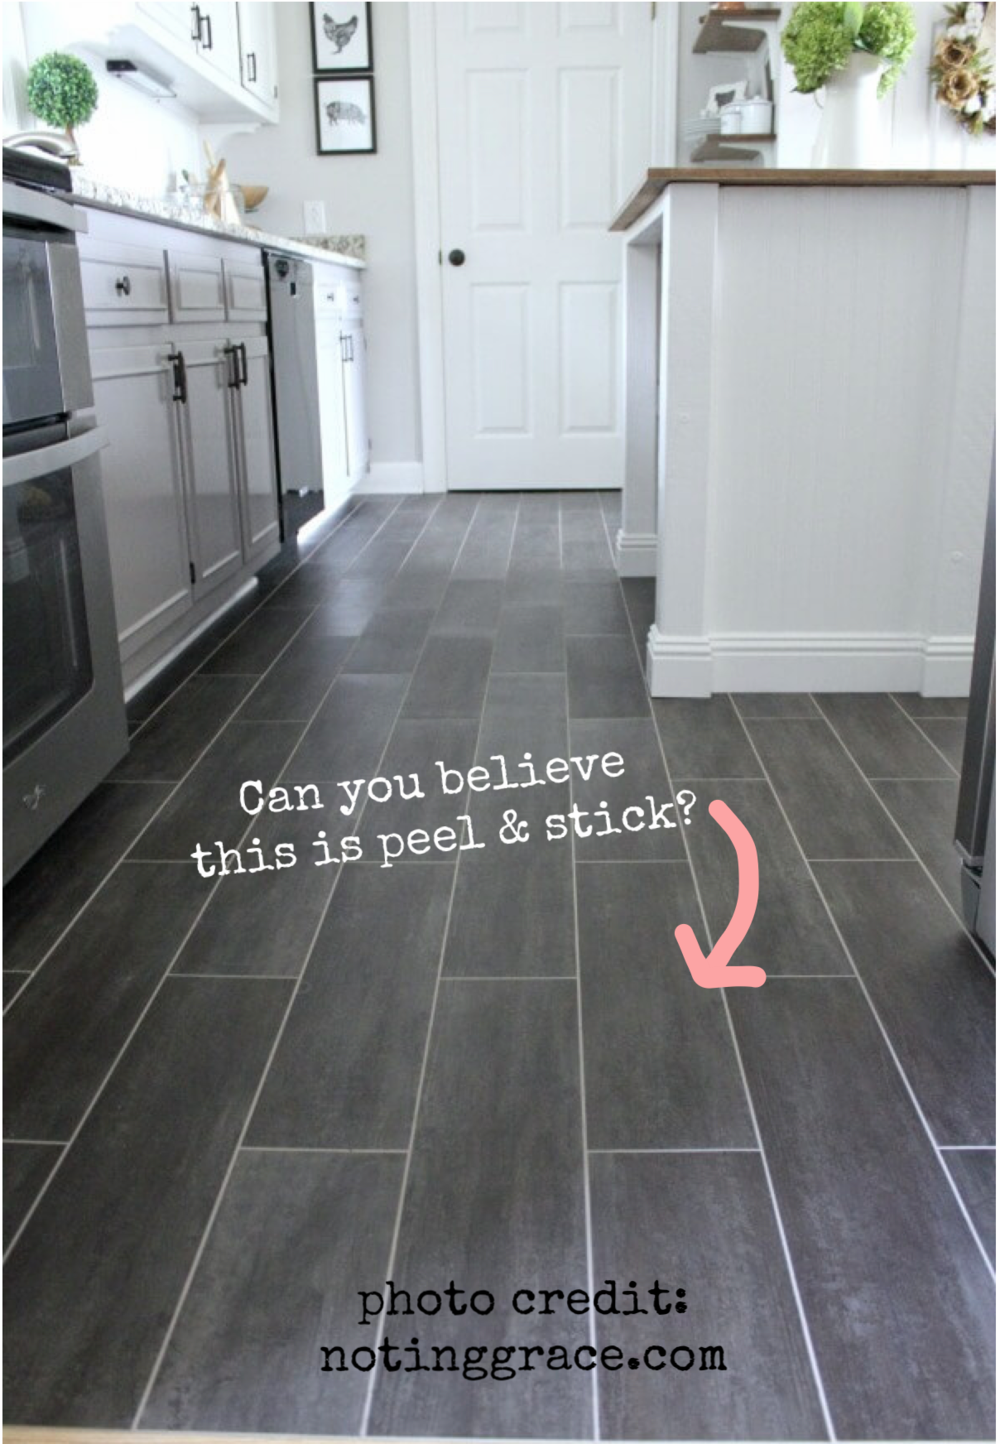 Ideas For Covering Up Tile Floors, What Flooring Can You Put Over Ceramic Tiles